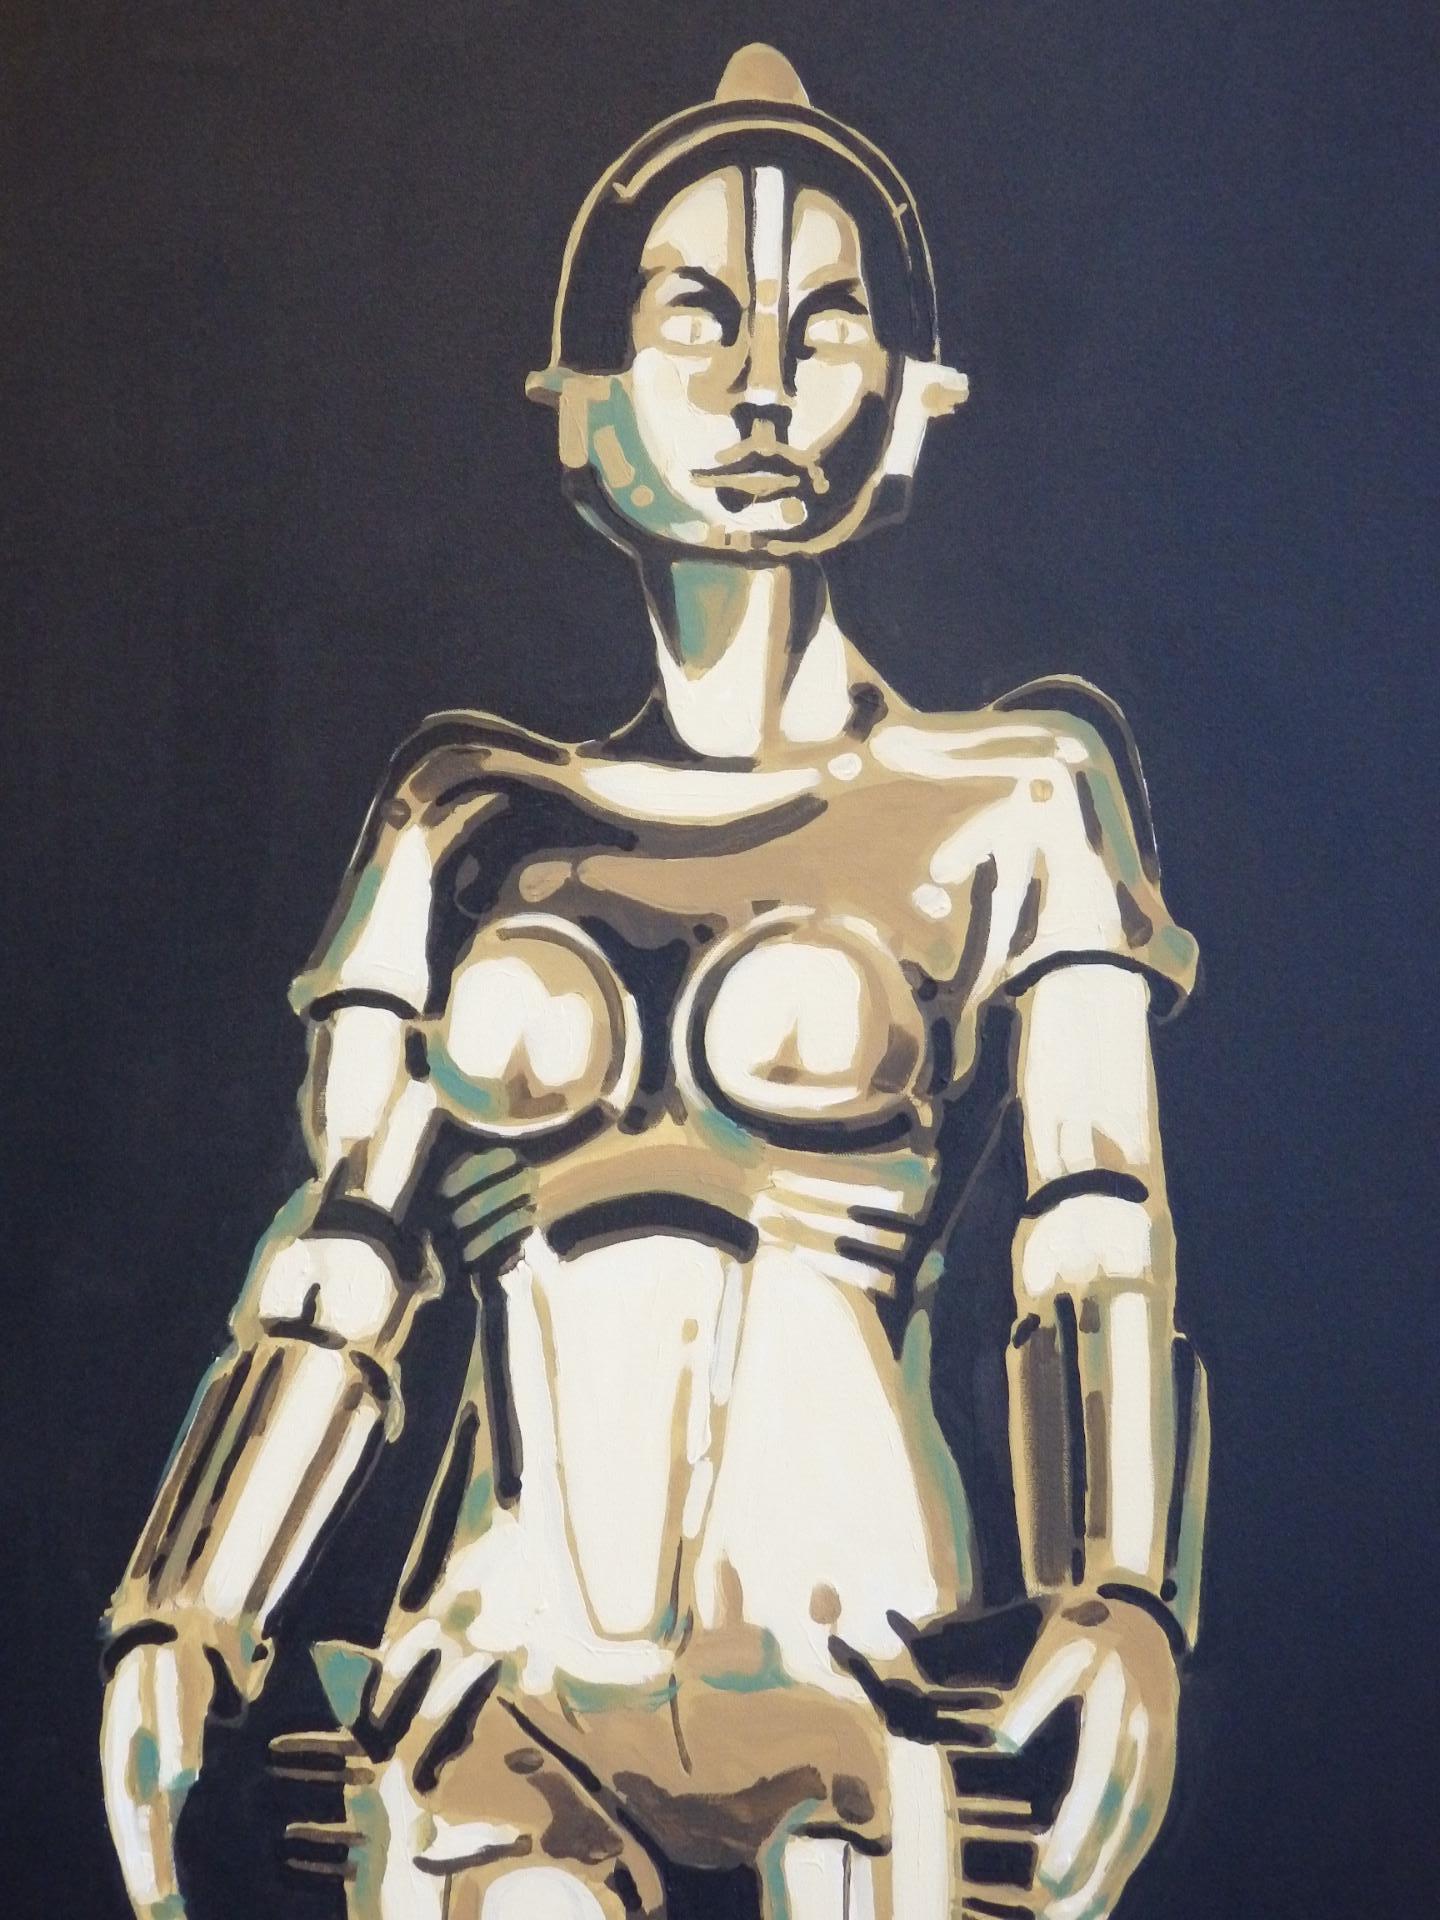 Stunning painting of Machinenmensch (robot) Maria from Fritz Langs silent masterpiece film Metropolis . Painted by Detroit area artist Billy couch. The Maschinenmensch is a character in Fritz Lang's film Metropolis, brought to life by German actress